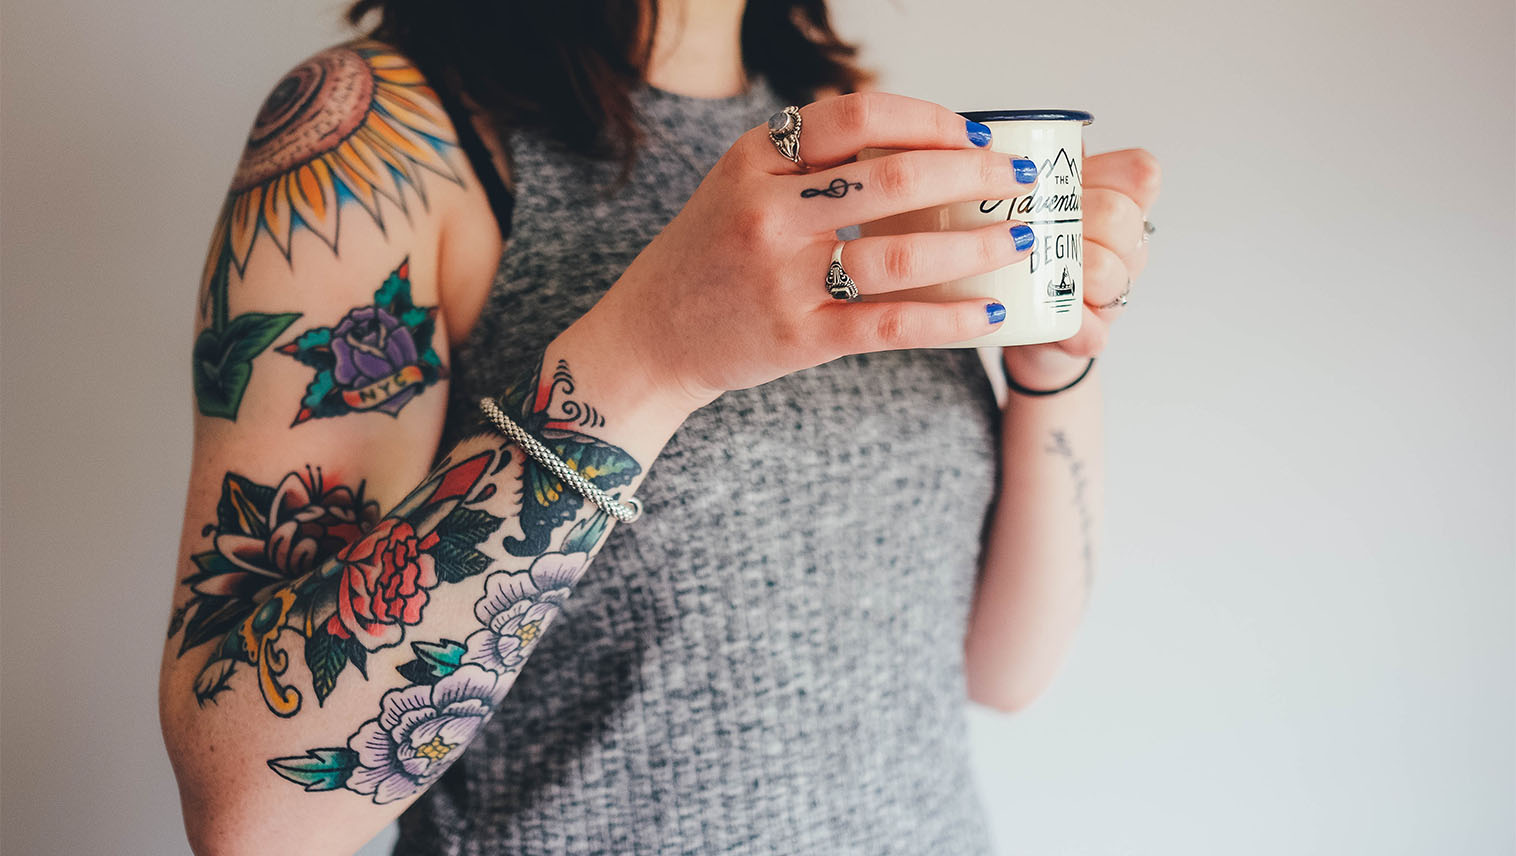 Consider Laser Hair Removal Before Getting Tattoos